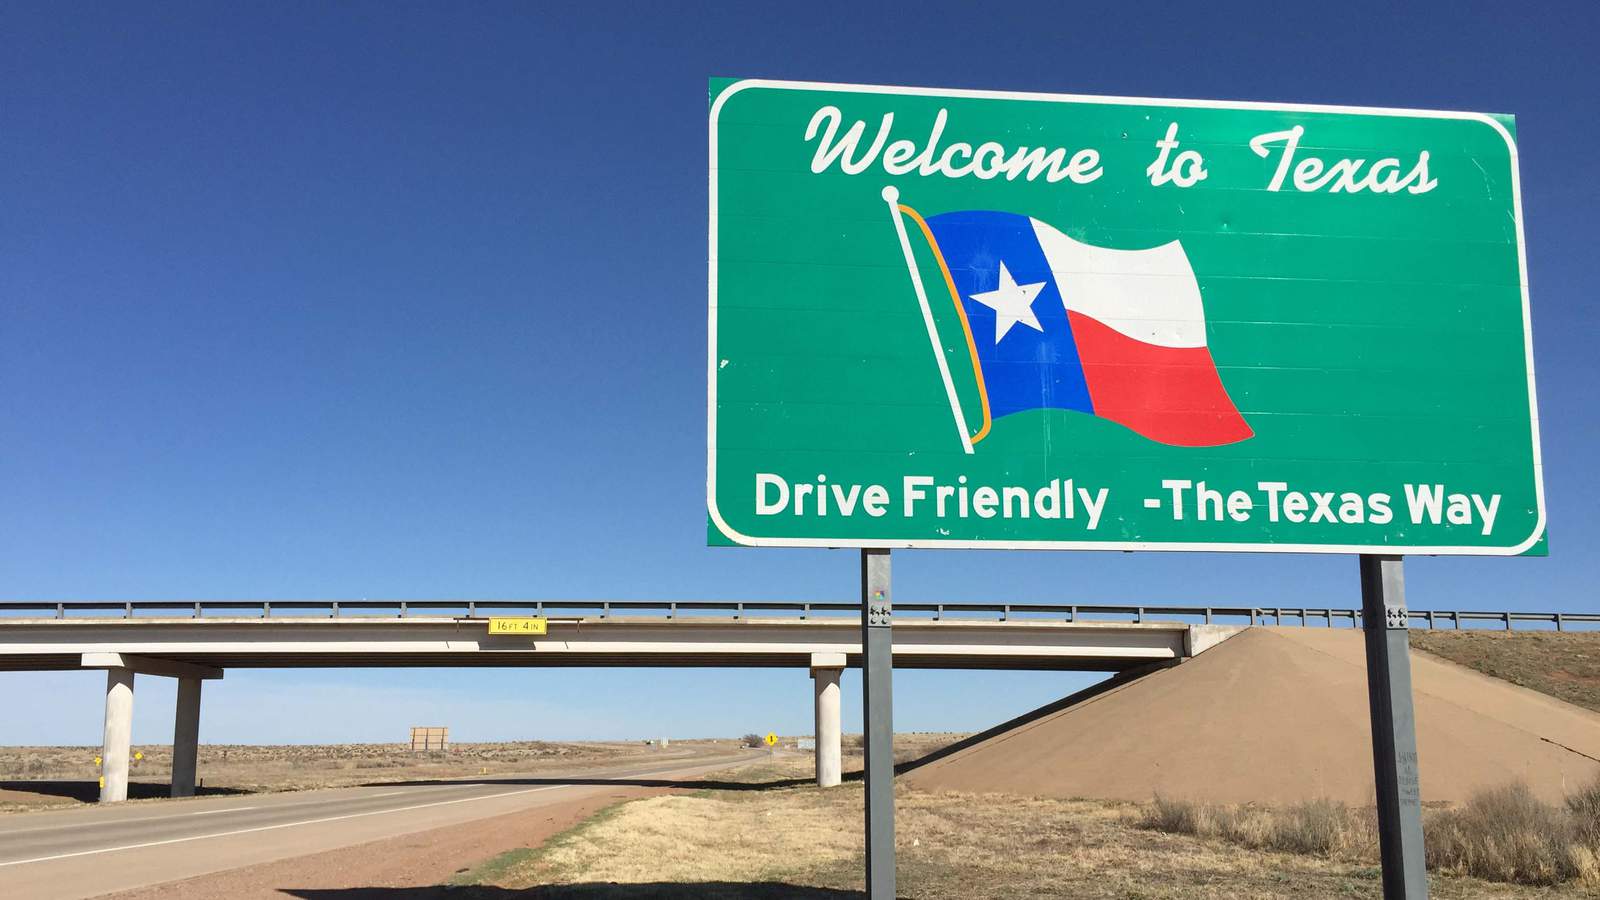 How Texas became known as ‘The Friendly State’